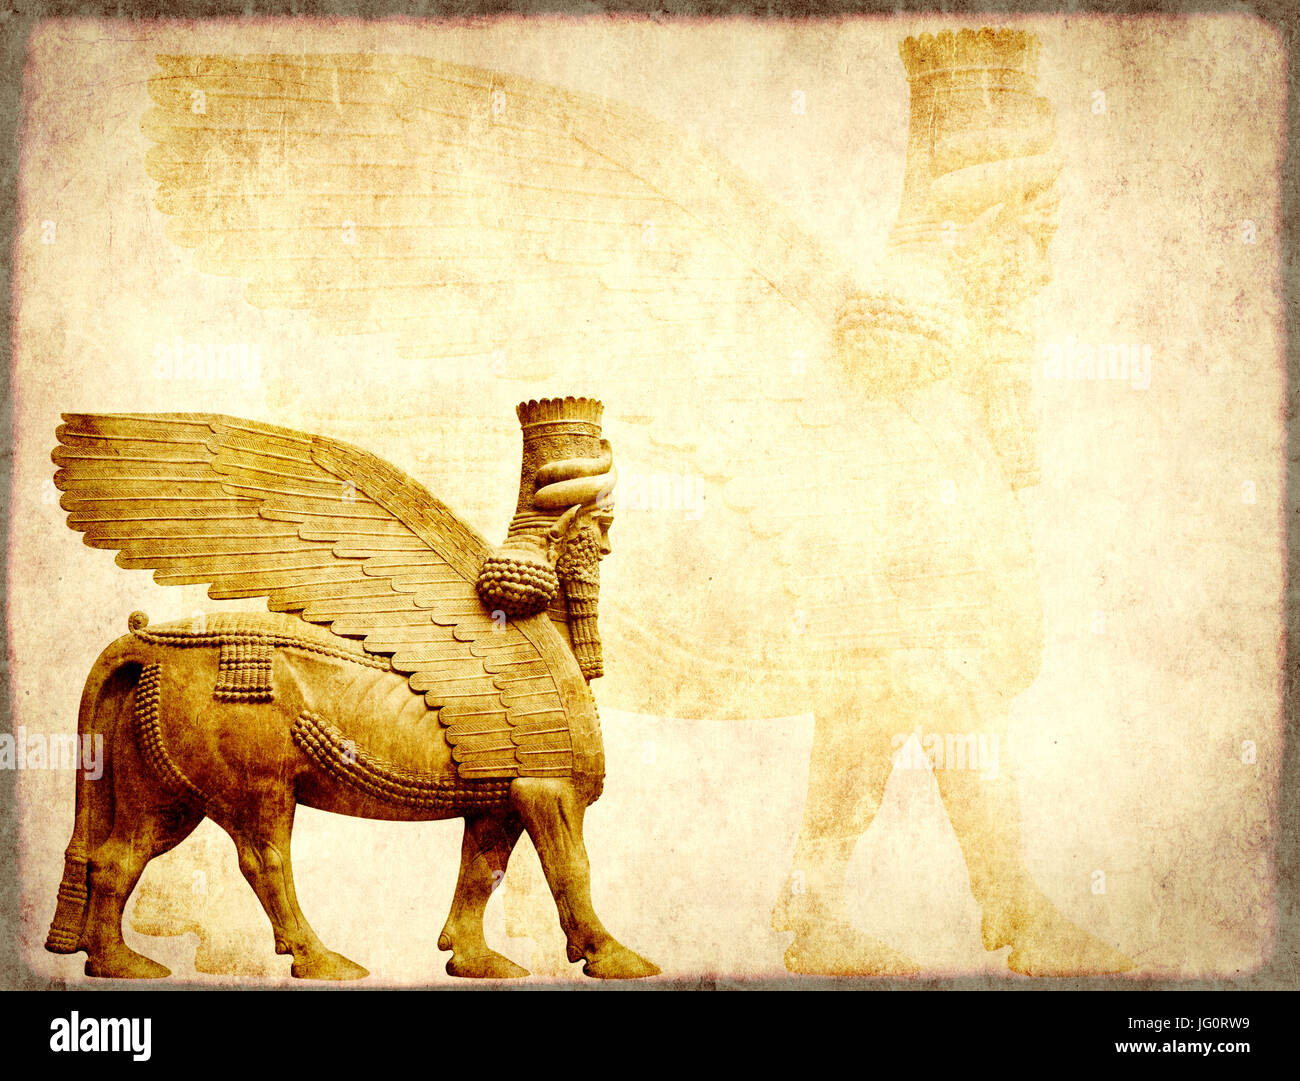 Grunge background with paper texture and lamassu - human-headed winged bull statue, Assyrian protective deity Stock Photo